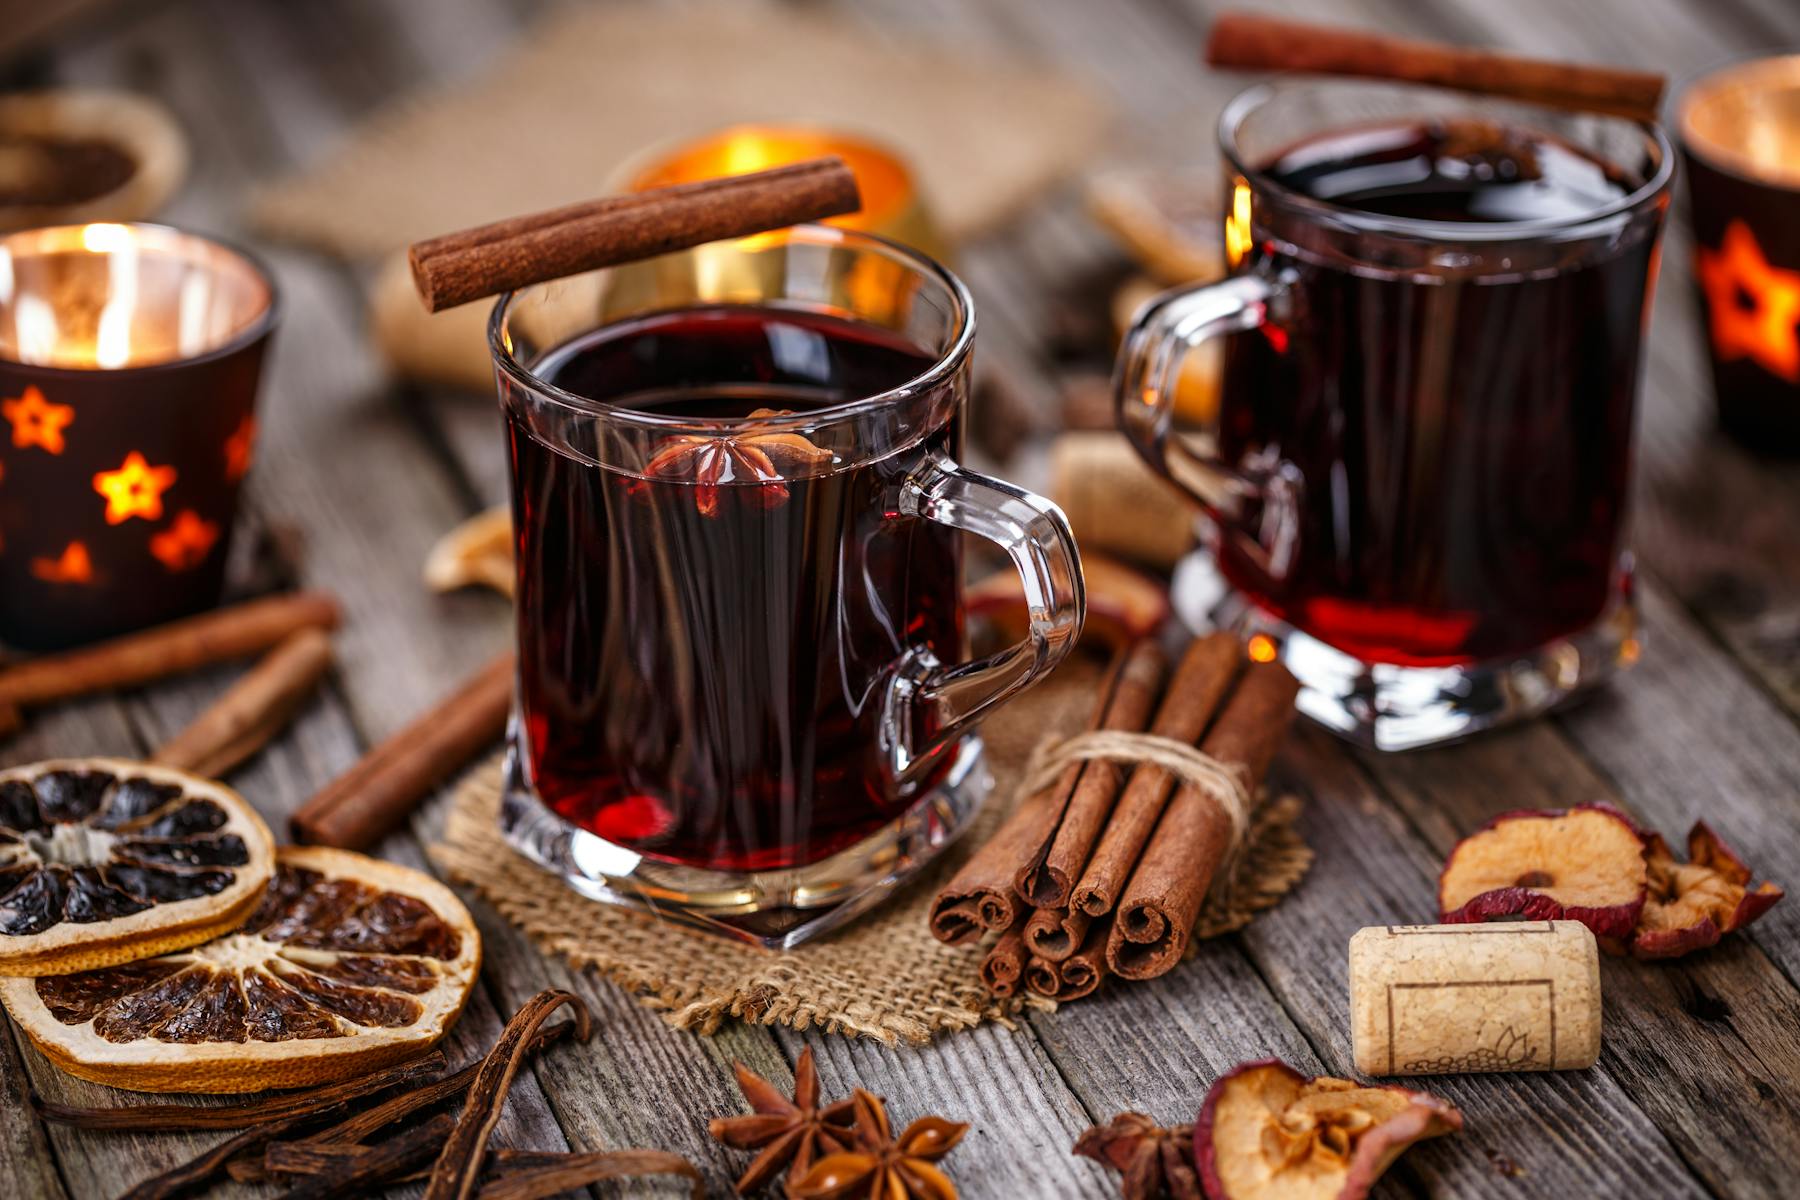 Mulled wine: a comforting drink, it embodies the very essence of Christmas and brings back heart-warming memories of childhood!